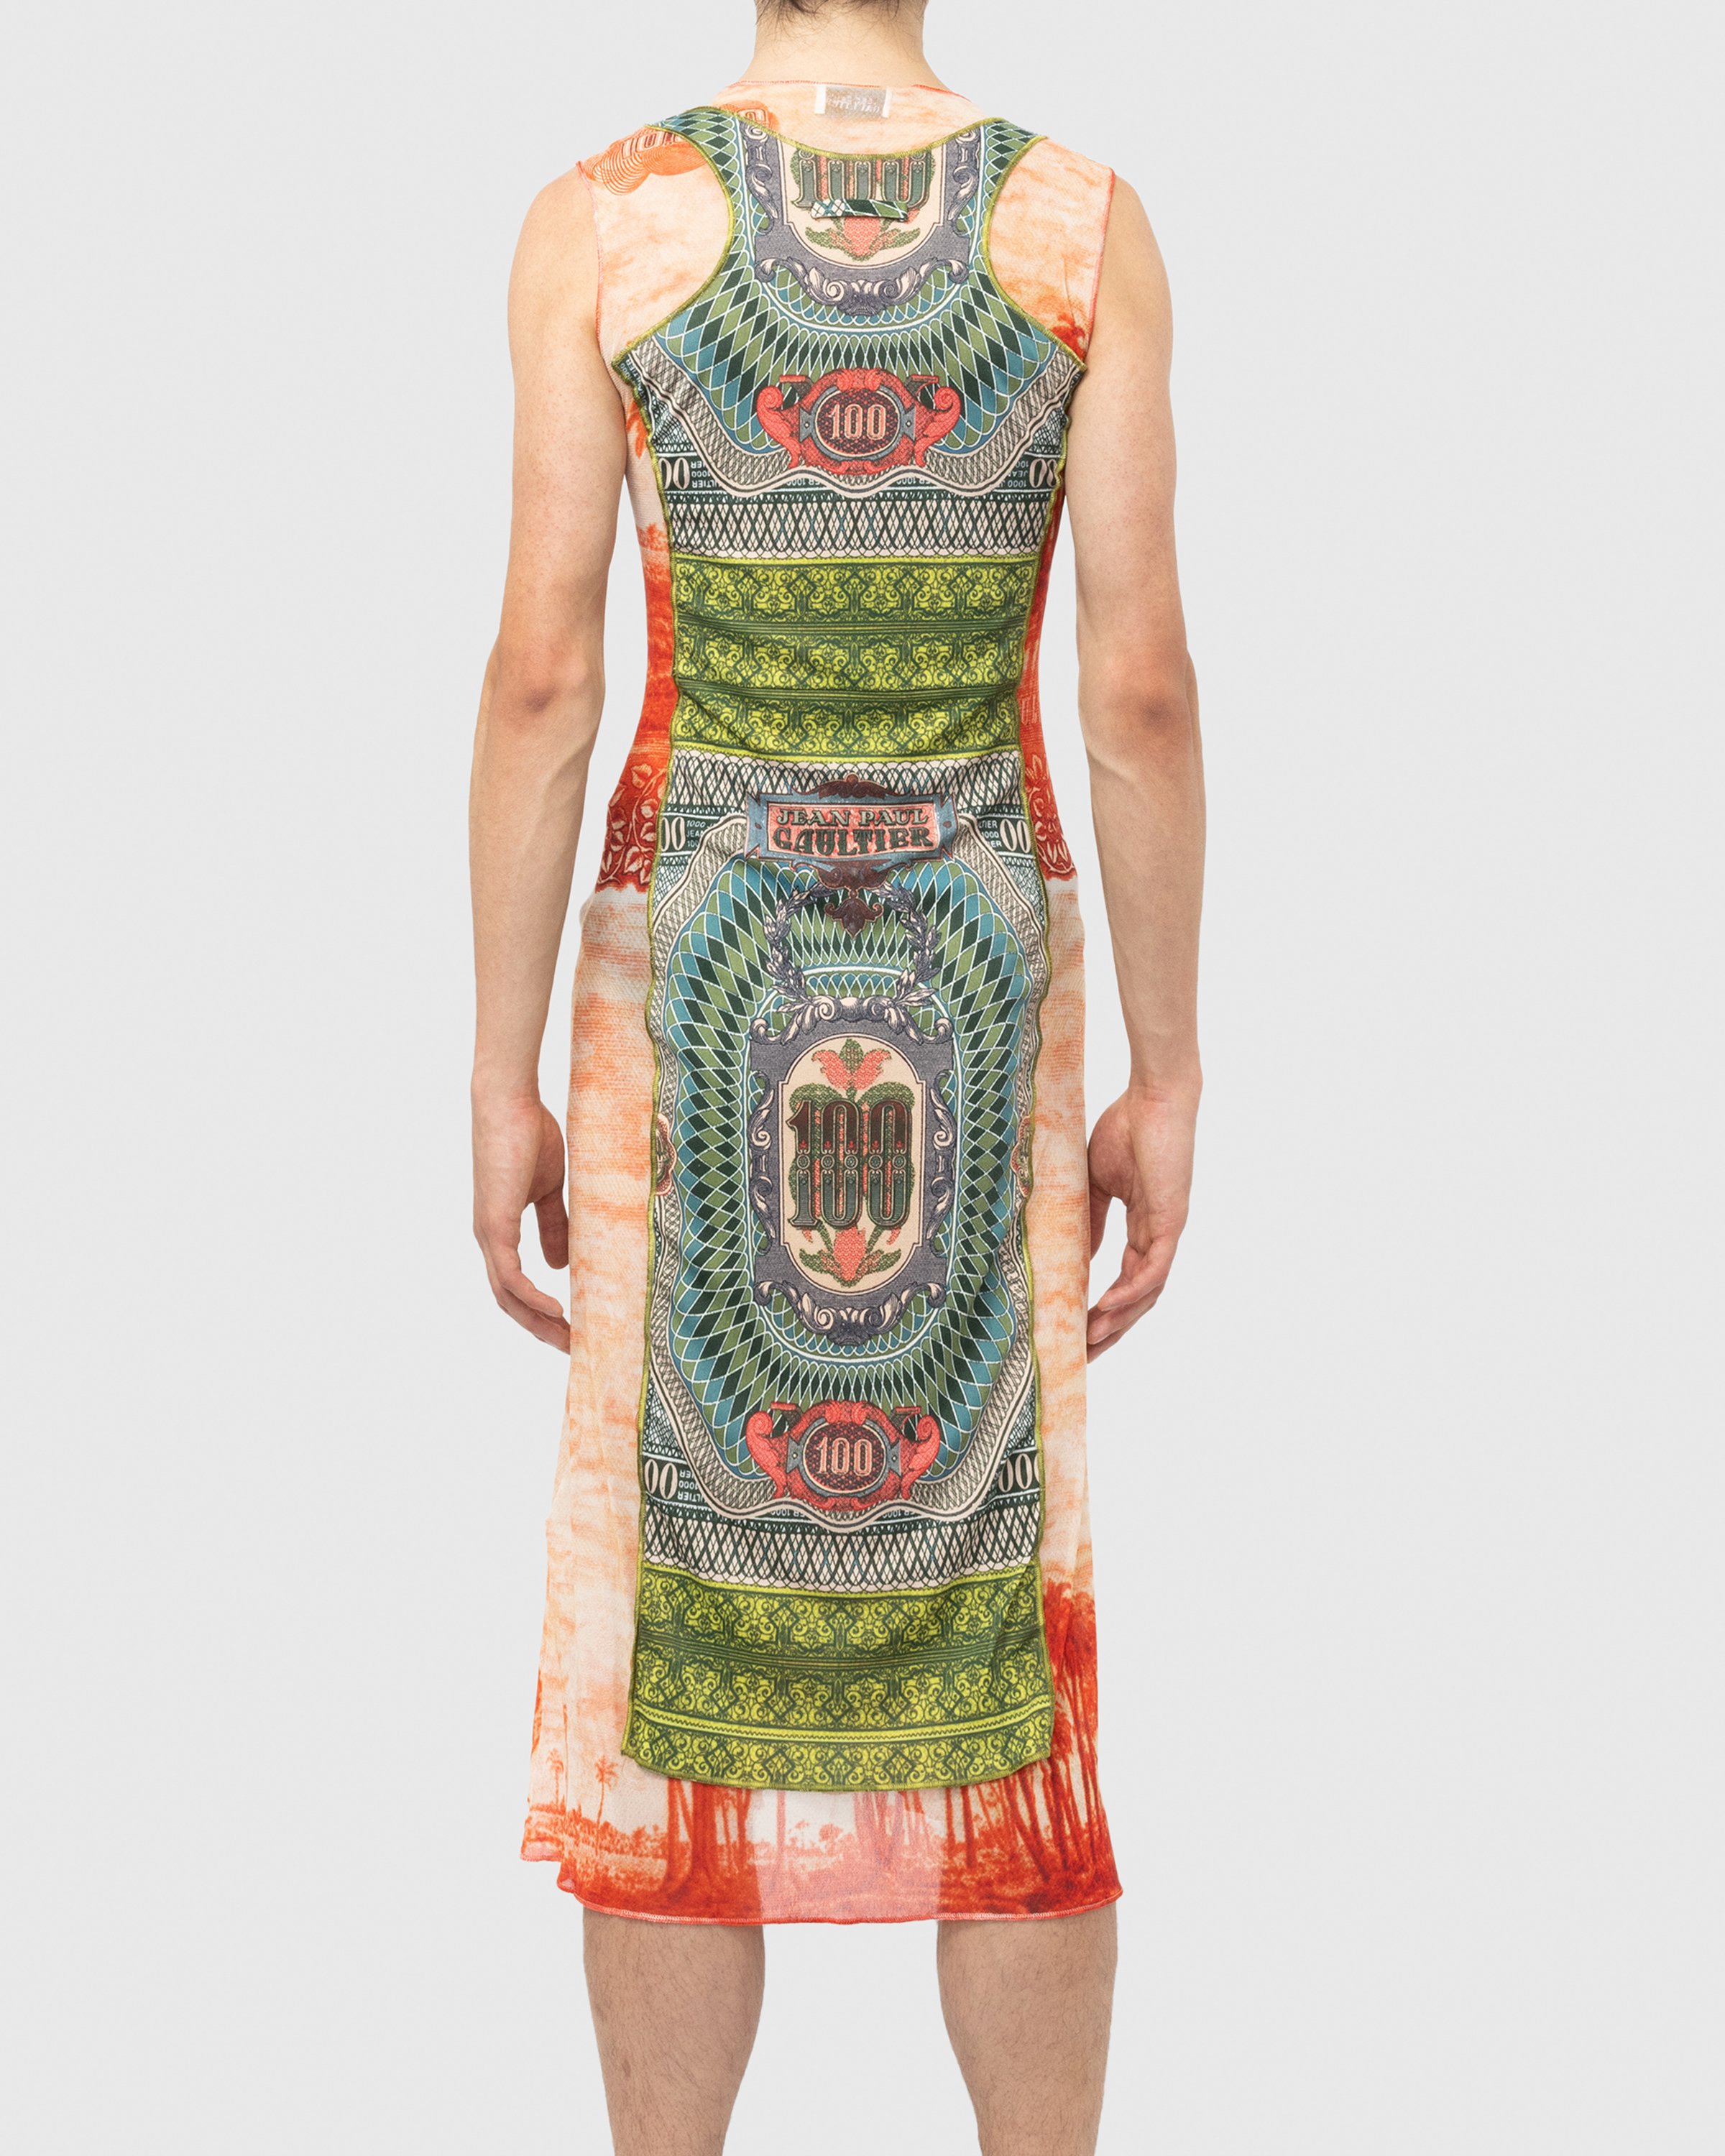 Jean Paul Gaultier - Banknote and Palm Tree Print Dress Multi - Clothing - Green - Image 4